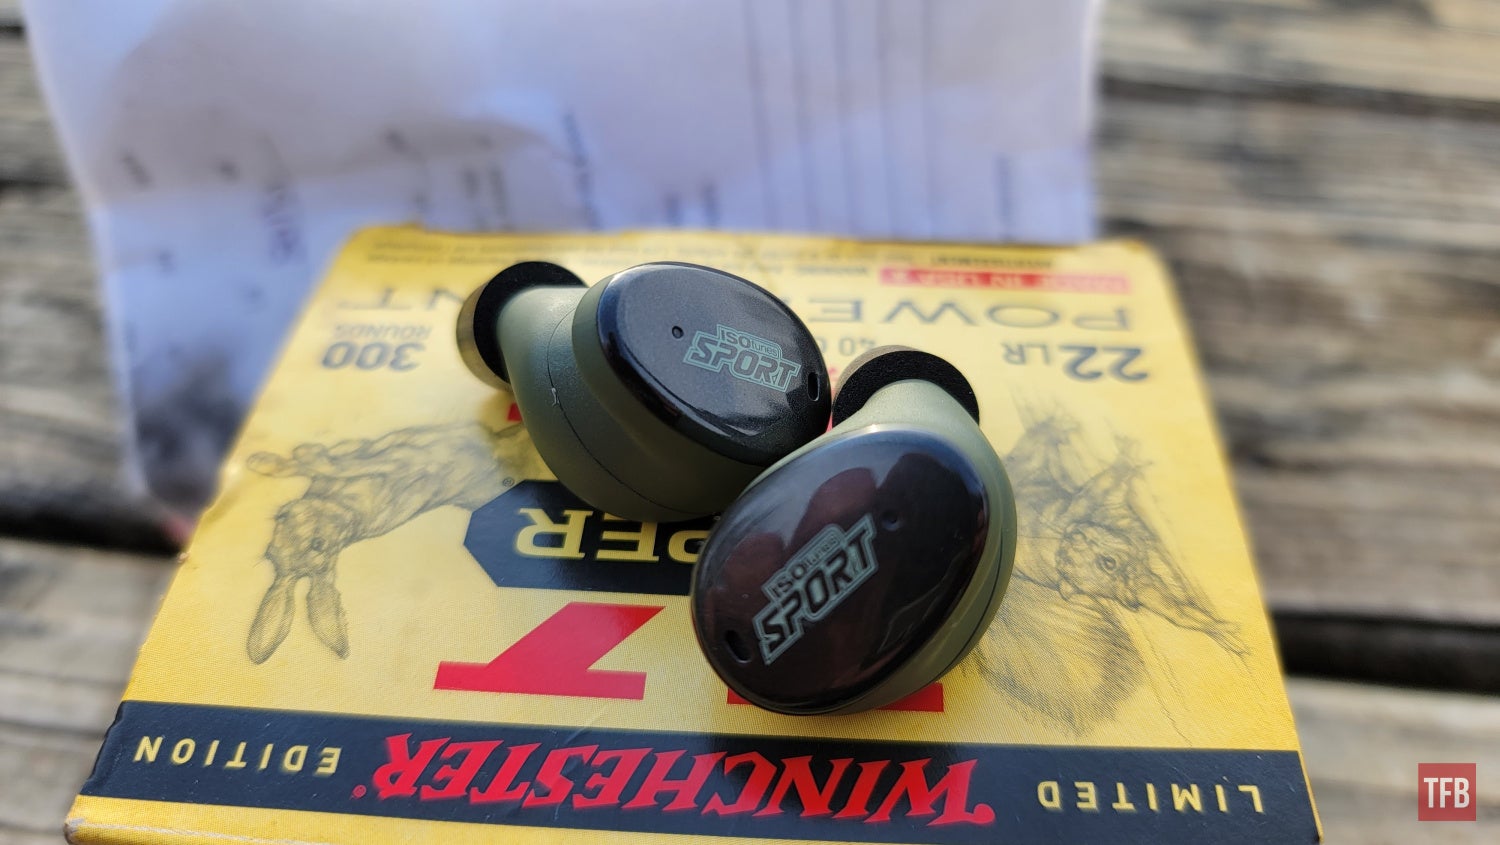 TFB Review: New ISOtunes Sport CALIBER Wireless Bluetooth Earbuds